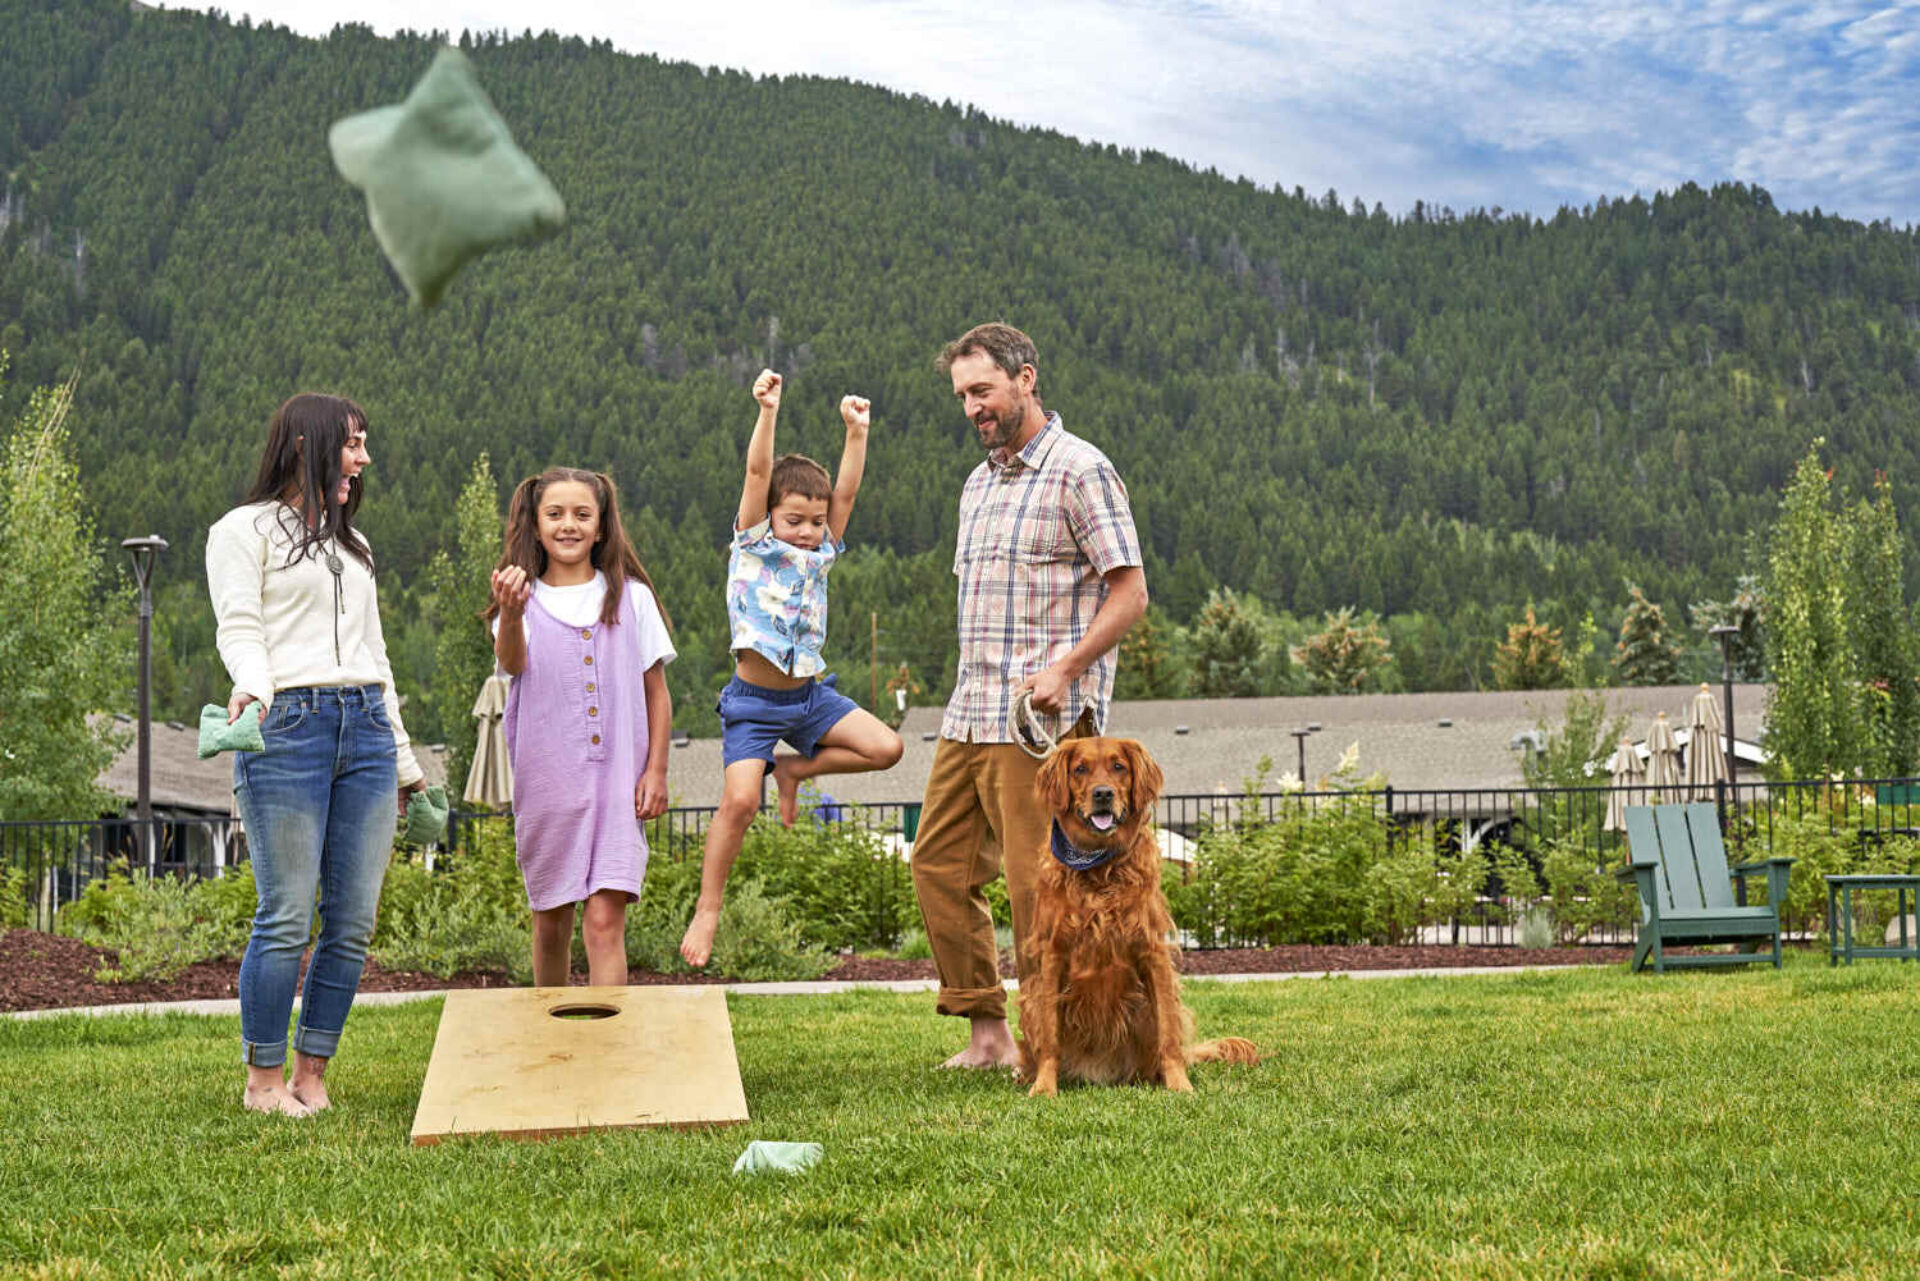 Family cherishes joyful moments in a grassy land, surrounded by lush greenery and mountains.